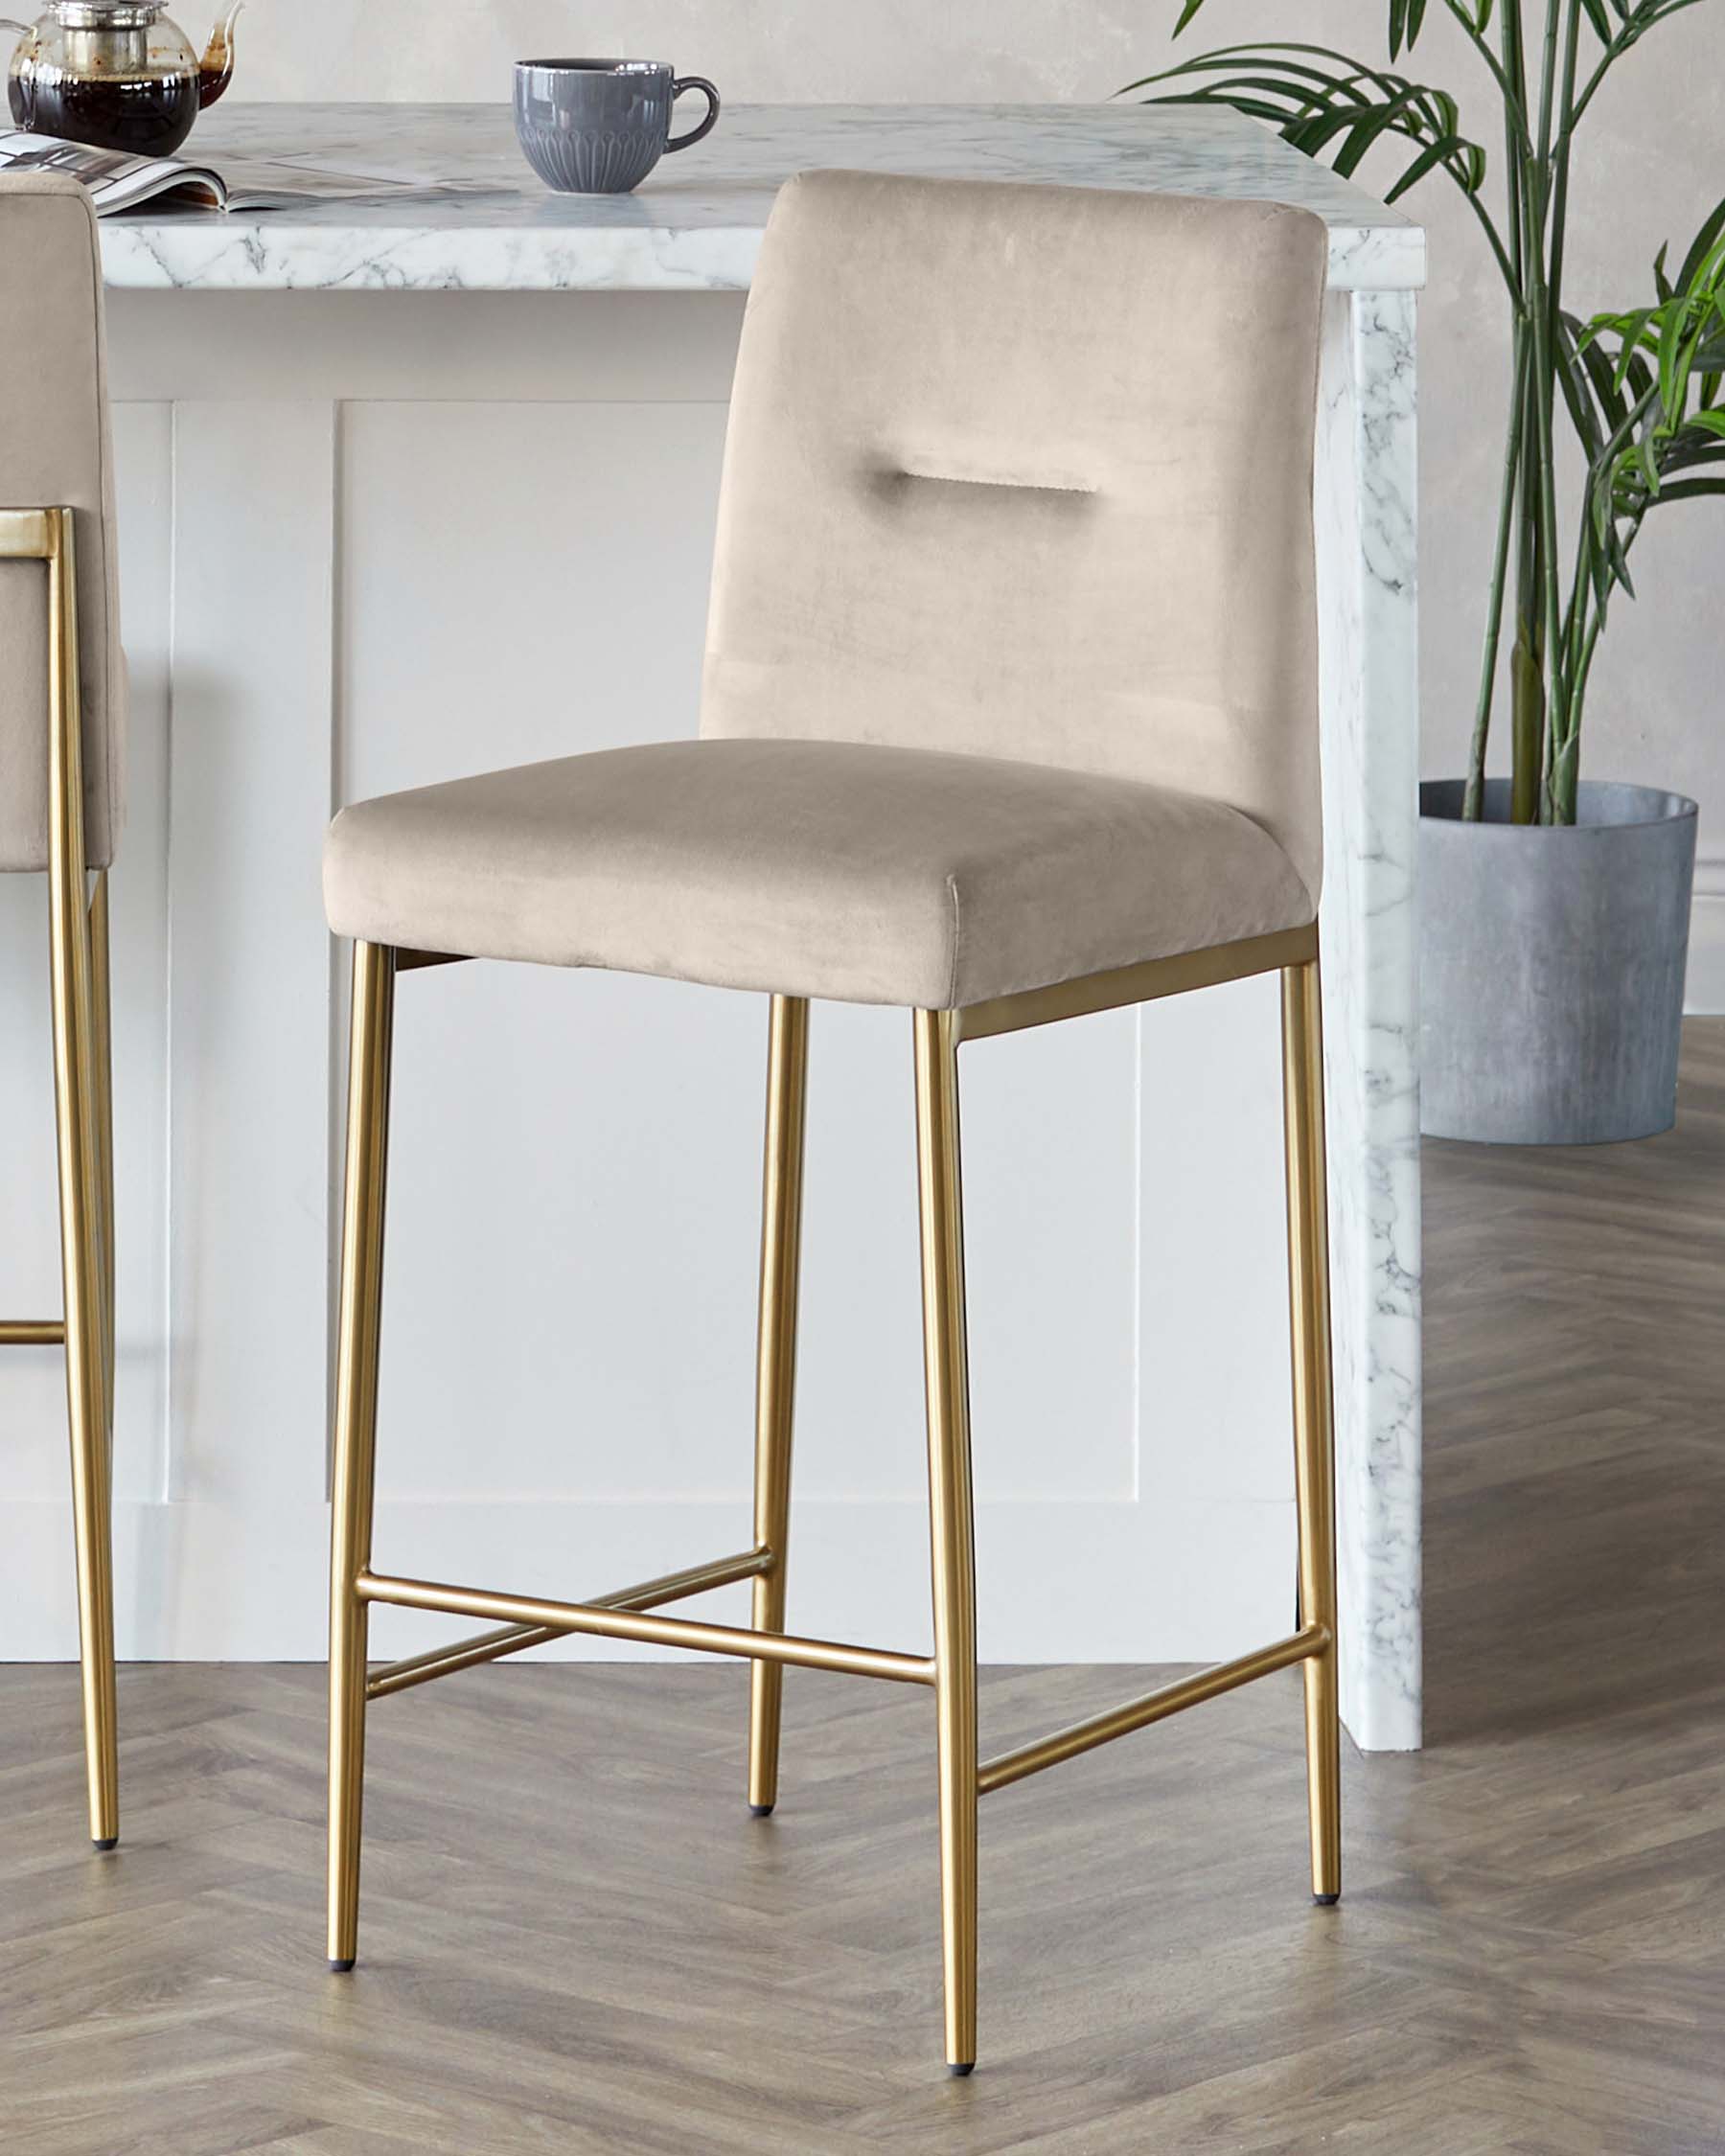 Keira Brass and Champagne Velvet Bar Stools by Danetti